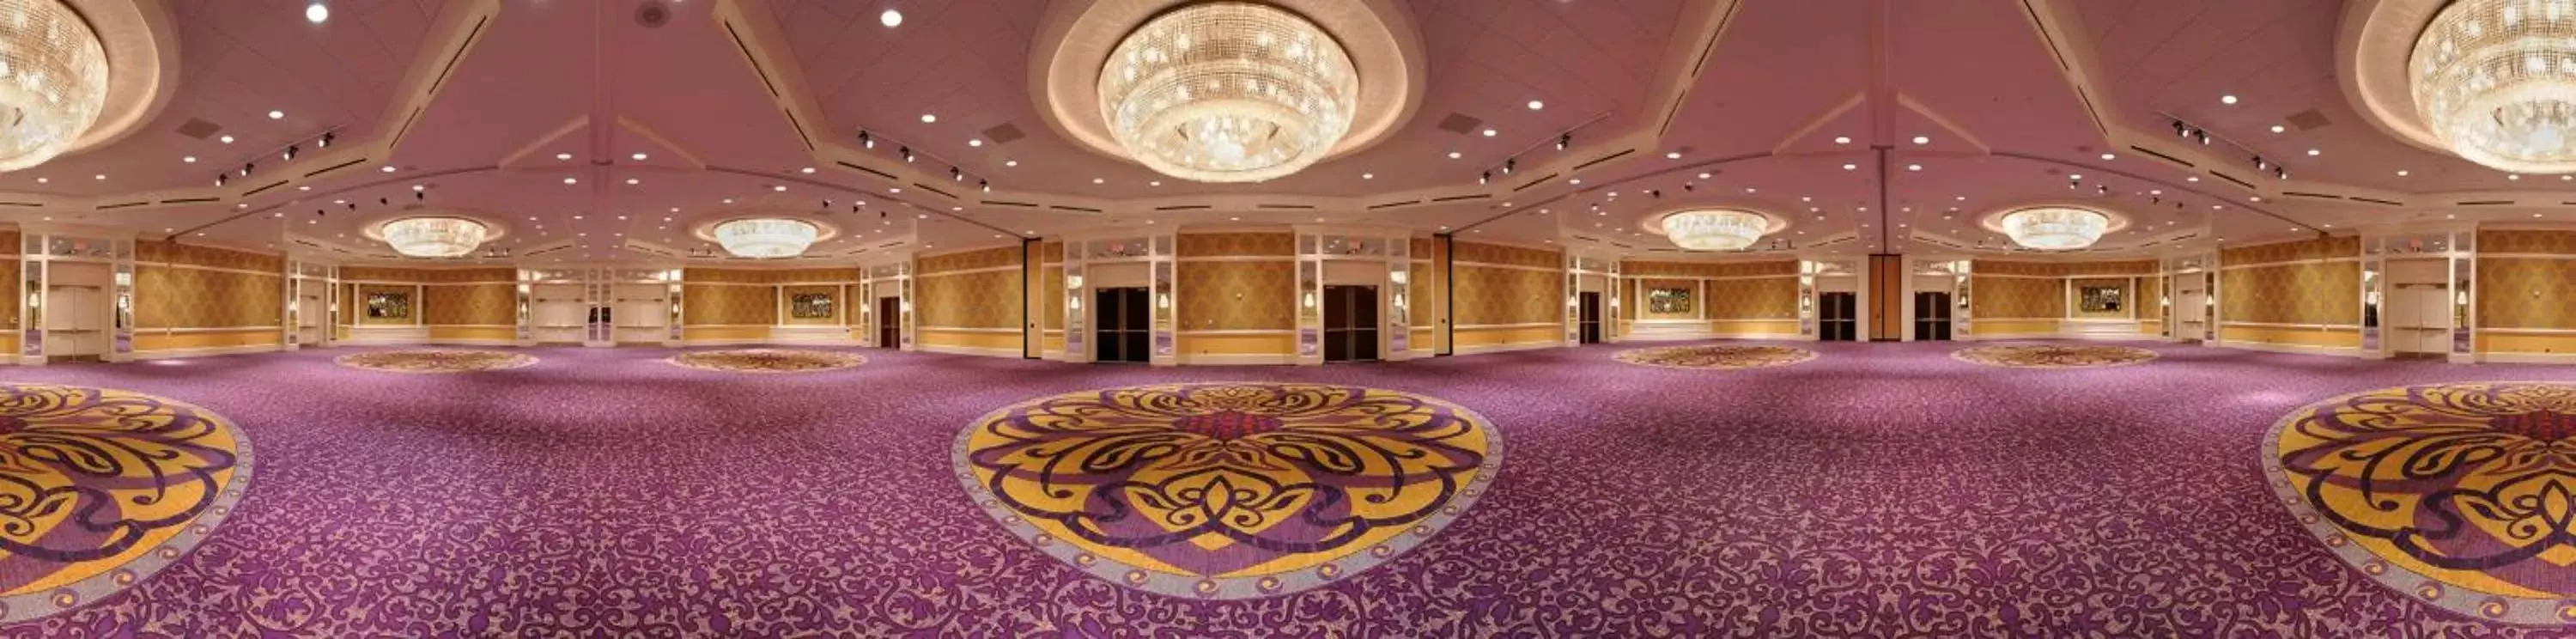 Meeting/conference room, Banquet Facilities in Hilton Charlotte Uptown